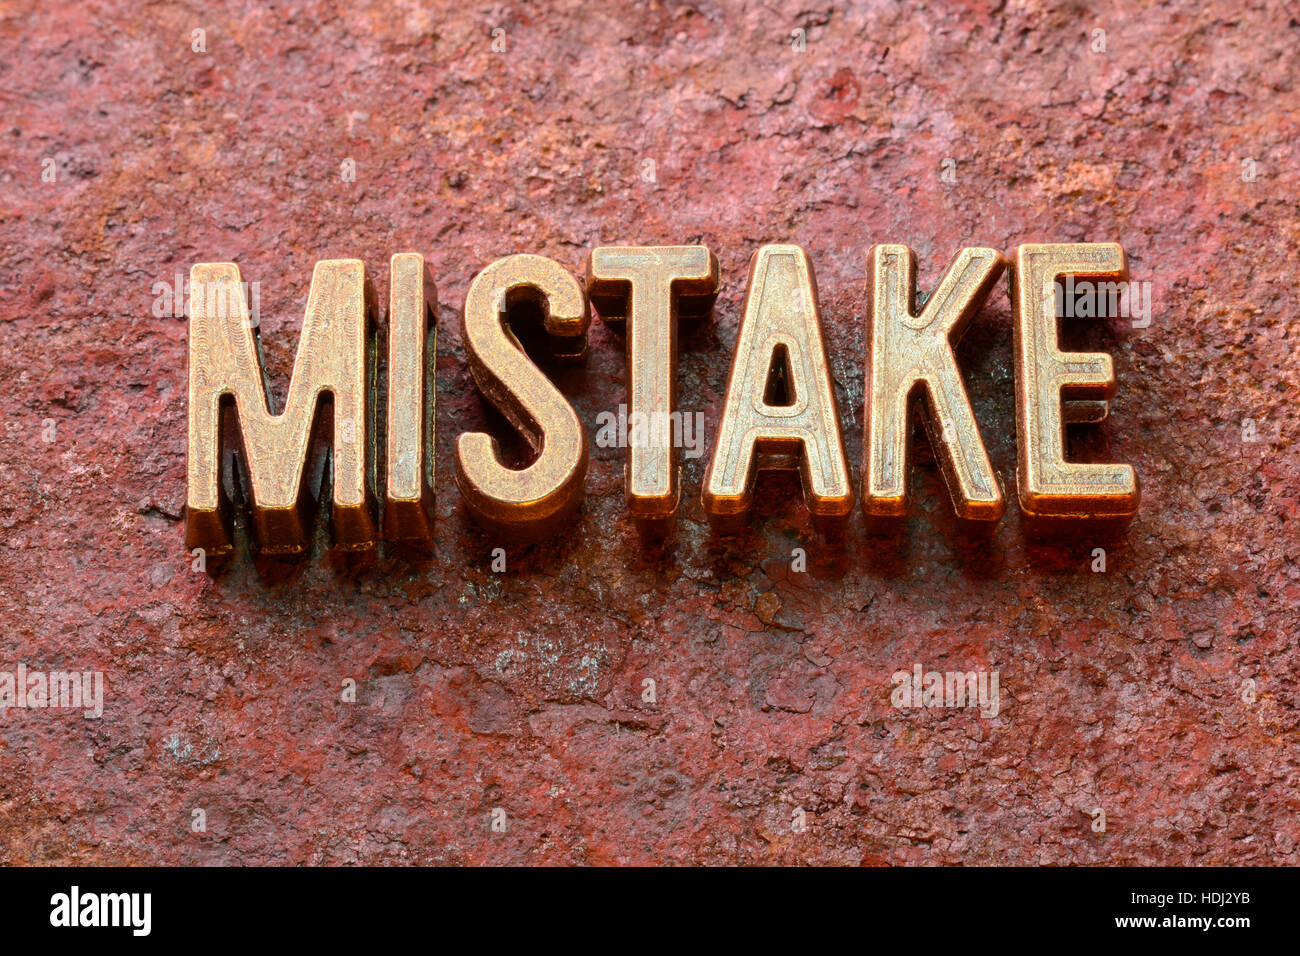 mistake word made from metallic letters on red rusty surface Stock Photo